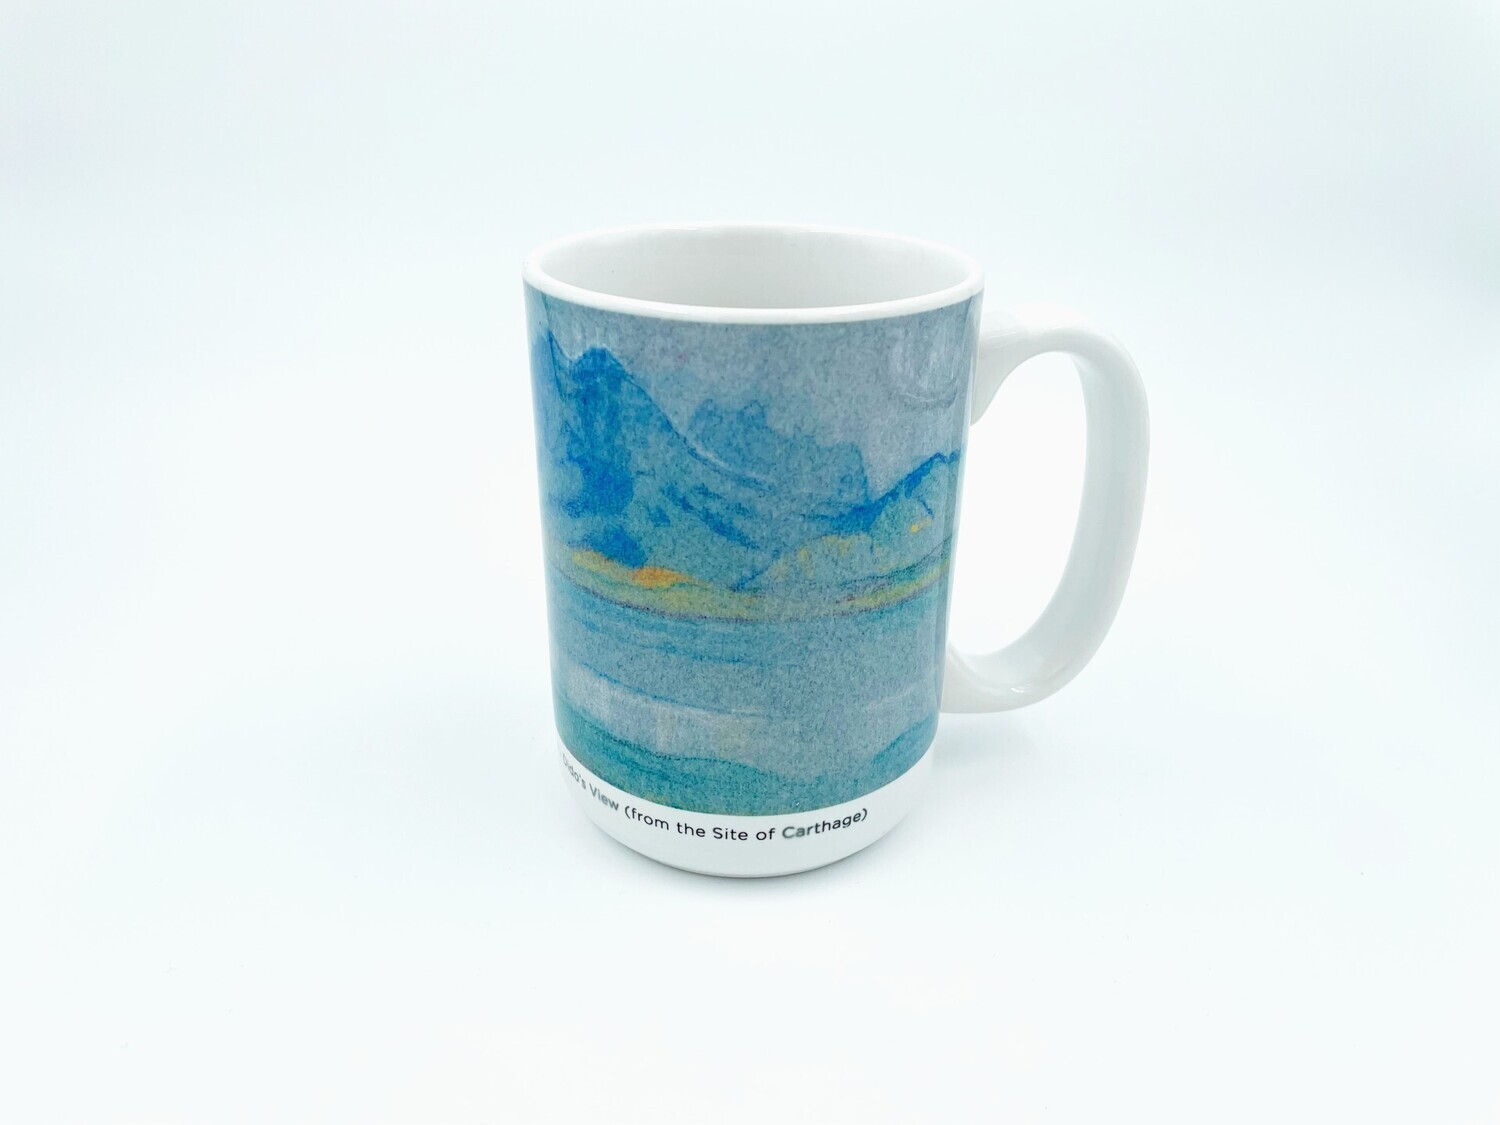 Violet Oakley “Dido’s View (from the Site of Carthage)” Mug